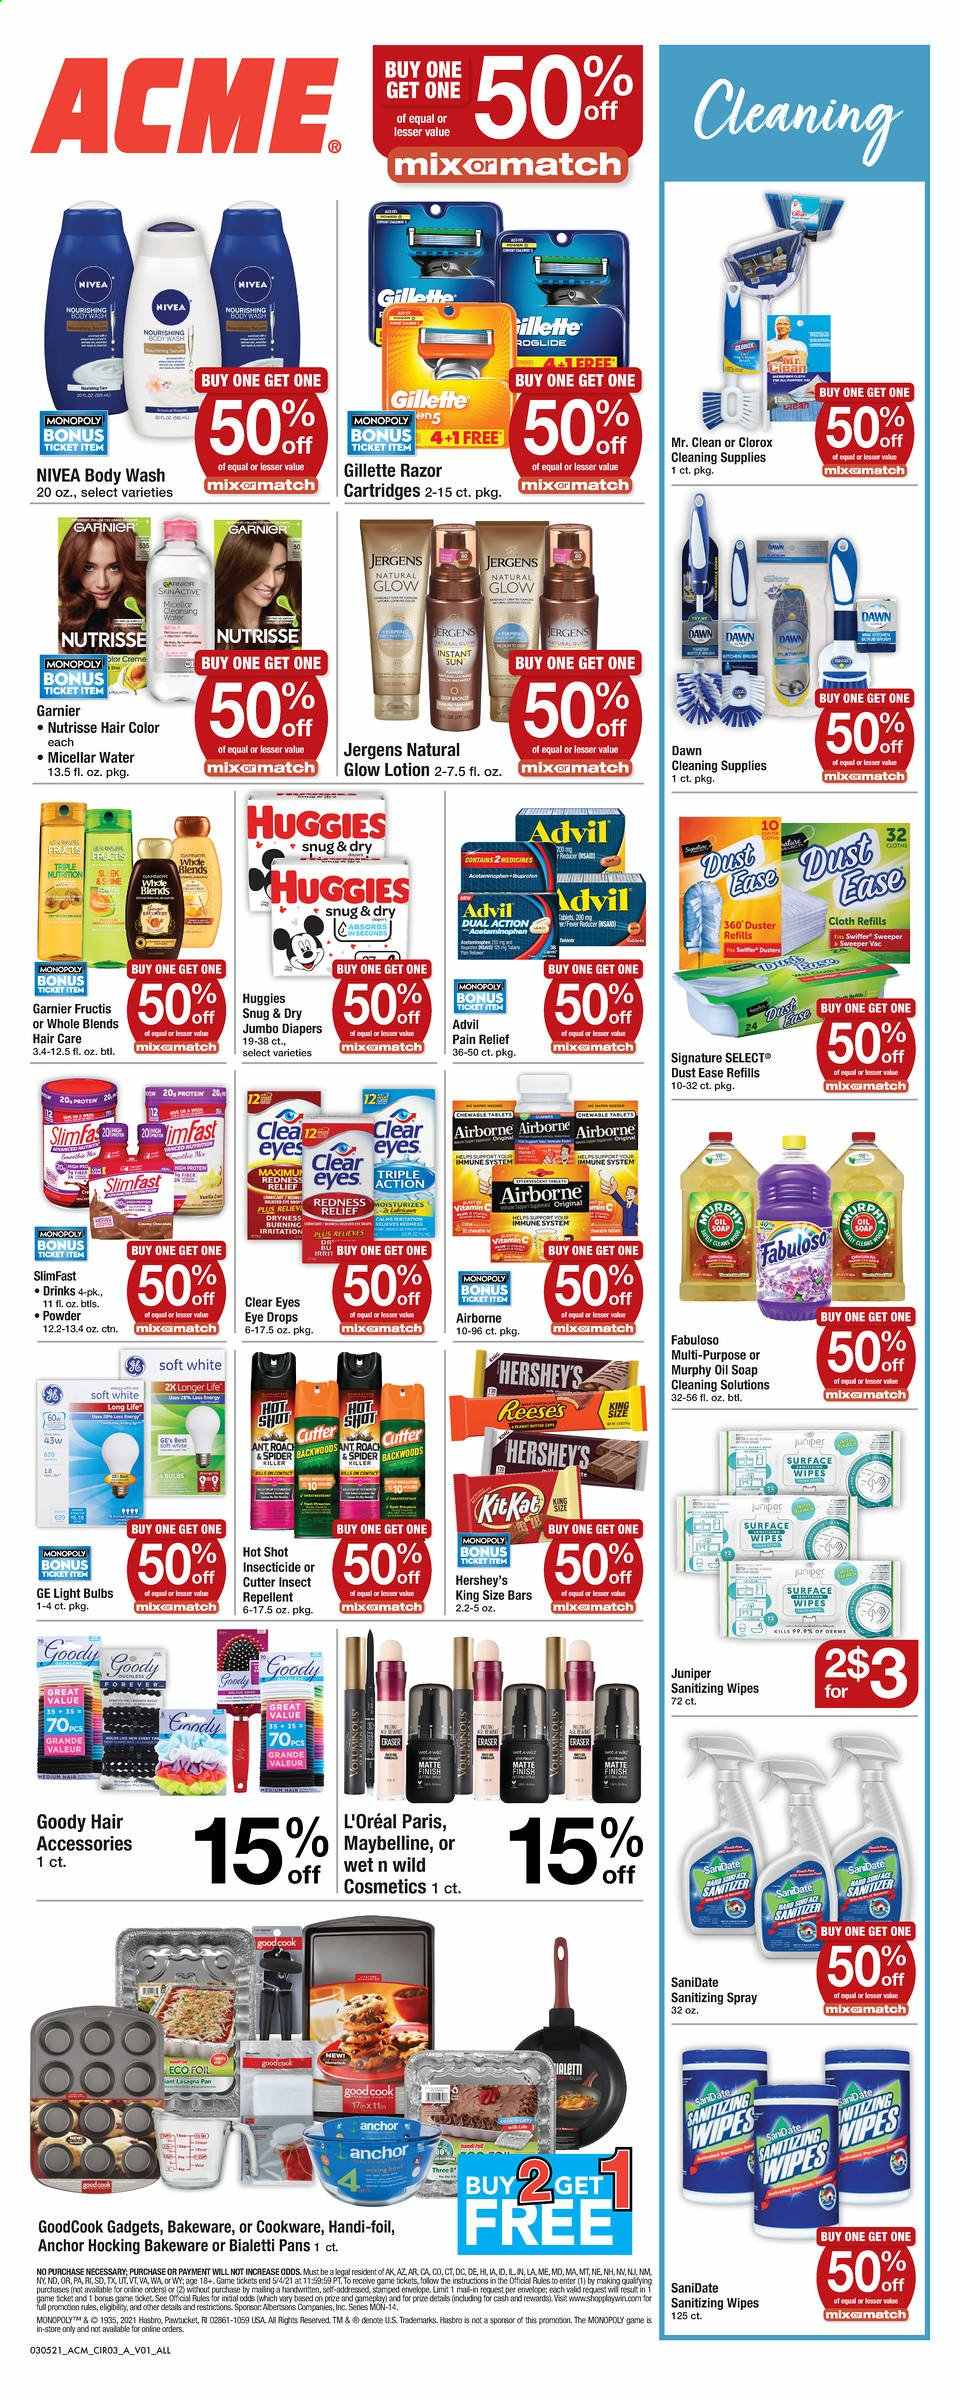 thumbnail - ACME Flyer - 03/05/2021 - 03/11/2021 - Sales products - Slimfast, Reese's, Hershey's, oil, Huggies, Nivea, wipes, antiseptic wipes, Clorox, Fabuloso, Swiffer, body wash, soap, Garnier, L’Oréal, micellar water, hair color, Fructis, body lotion, Jergens, Gillette, razor, repellent, insecticide, Maybelline, duster, cookware set, bakeware, envelope, cutter, bulb, light bulb, vacuum cleaner, Snug, Monopoly, Hasbro, pain relief, vitamin c, eye drops, Advil Rapid. Page 5.